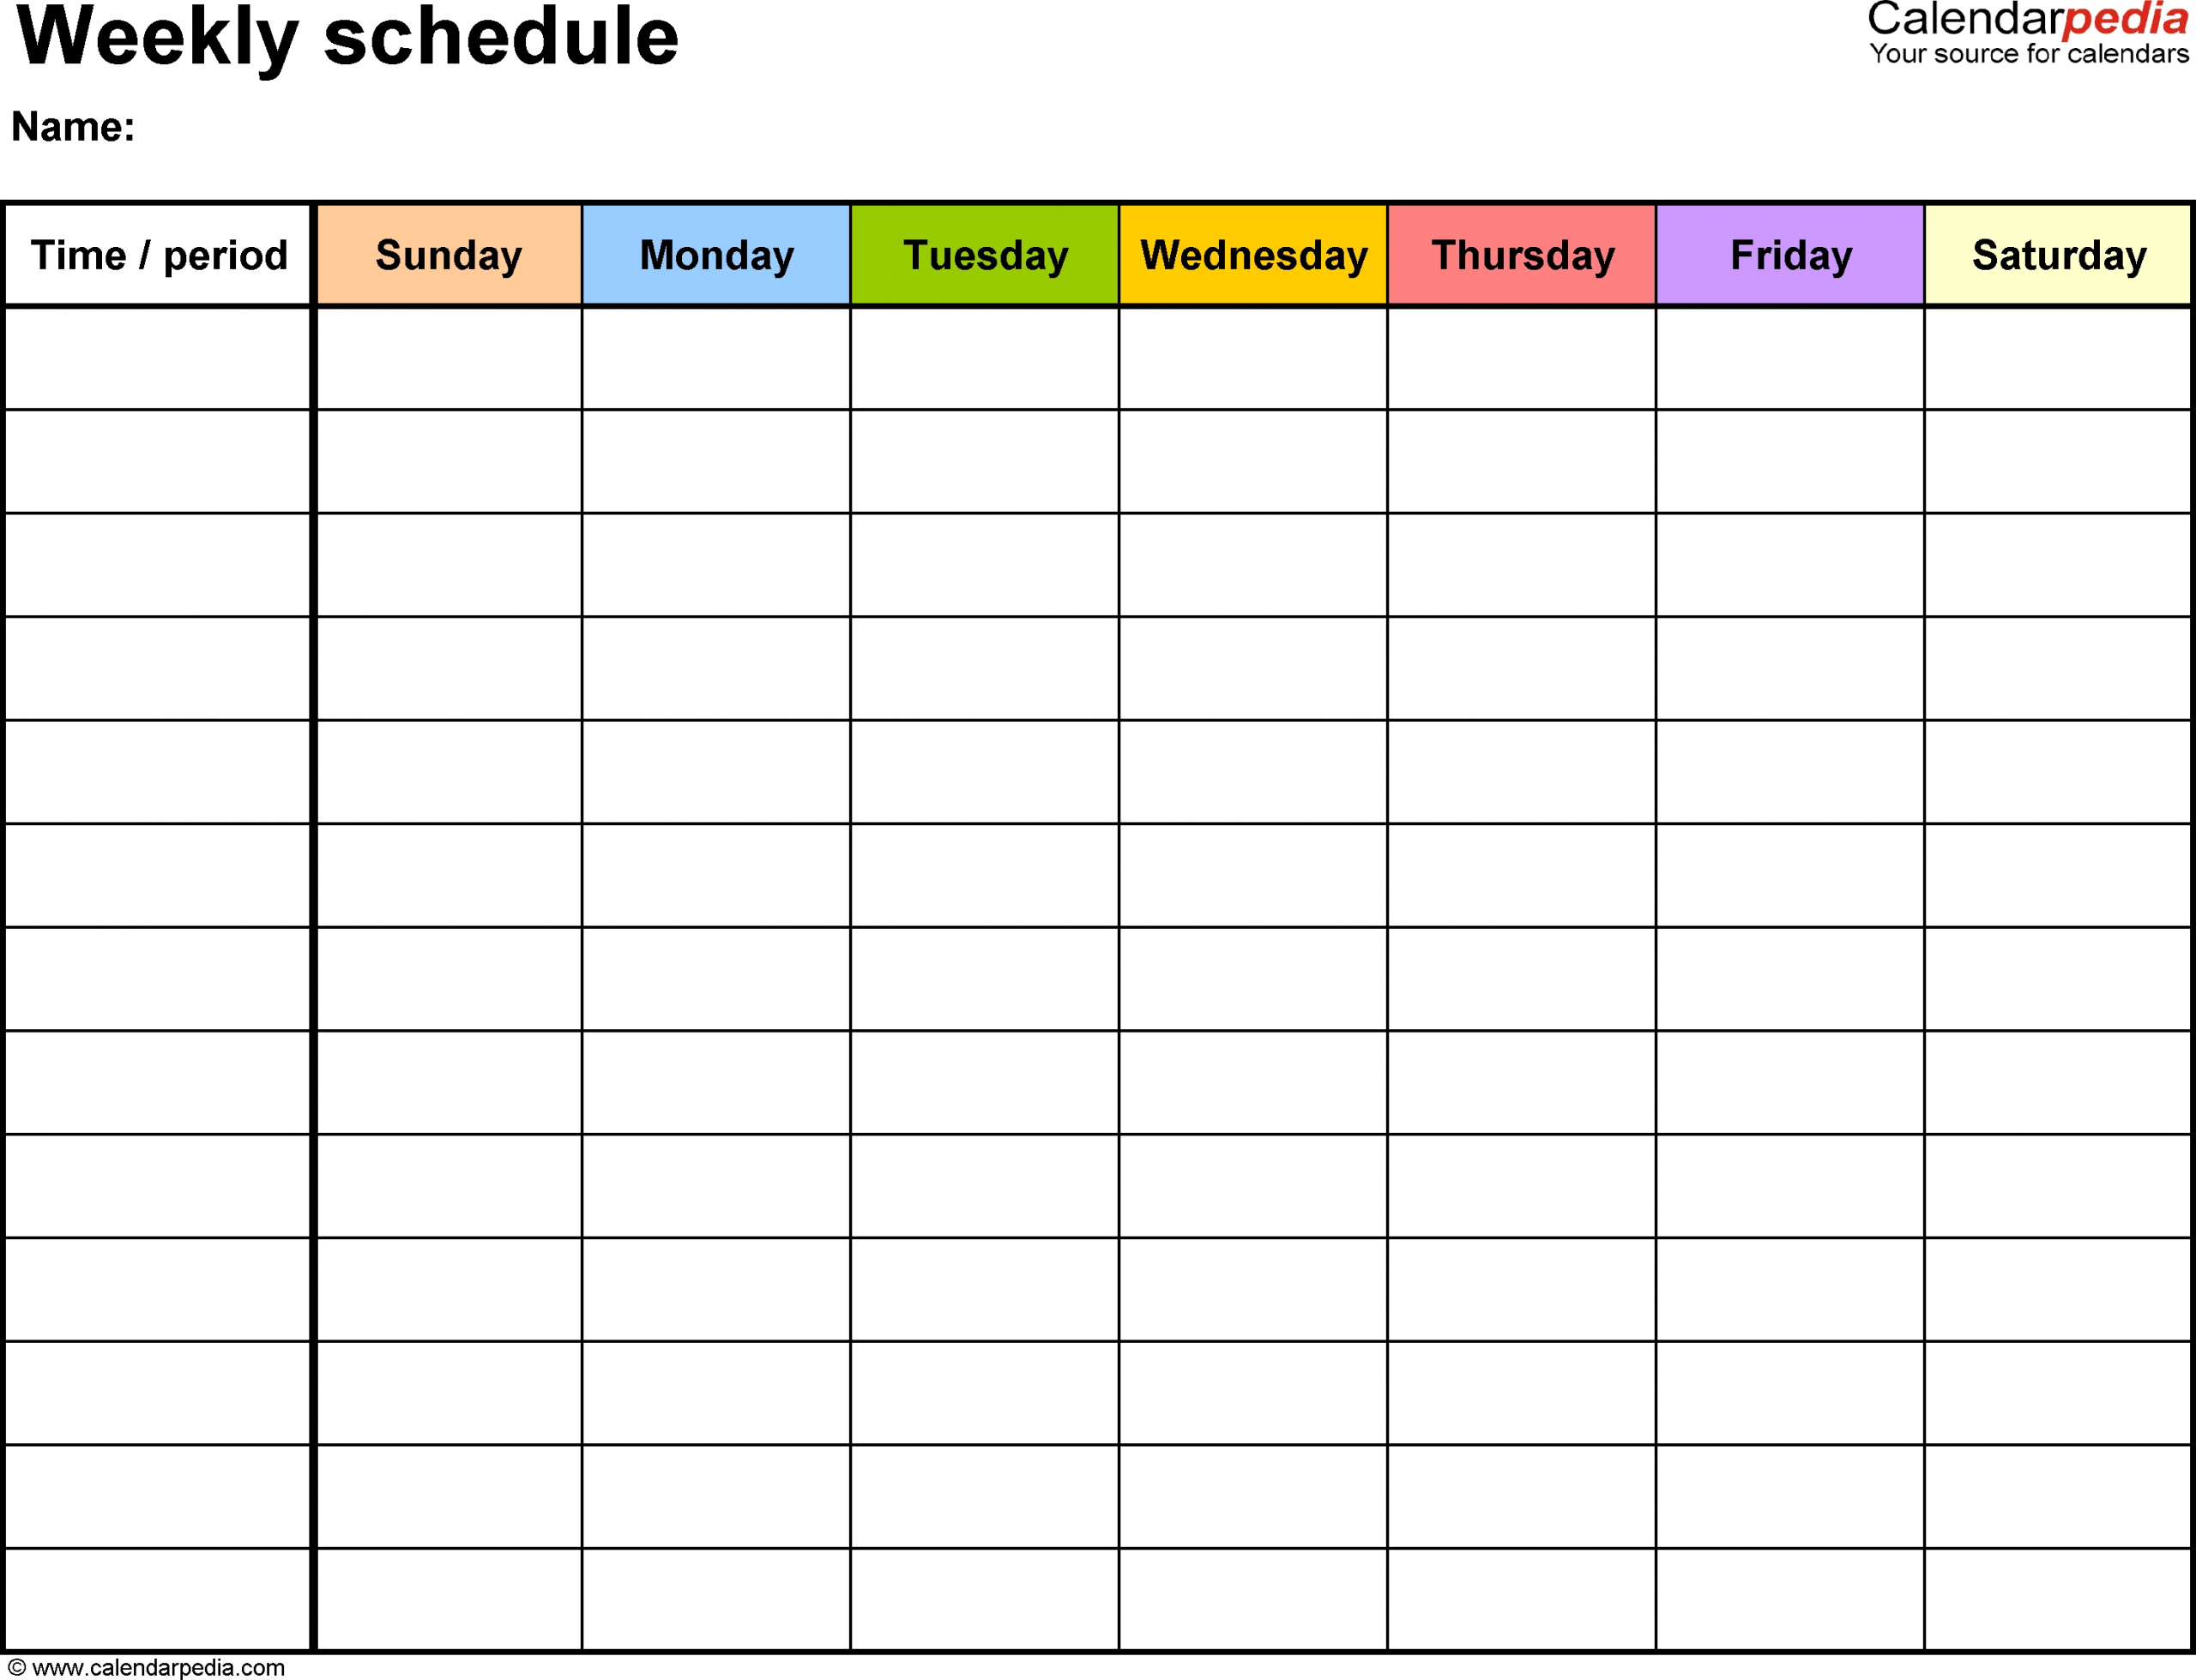 Free Weekly Schedule Templates For Word - 18 Templates pertaining to 7 Day Calendar Template Free